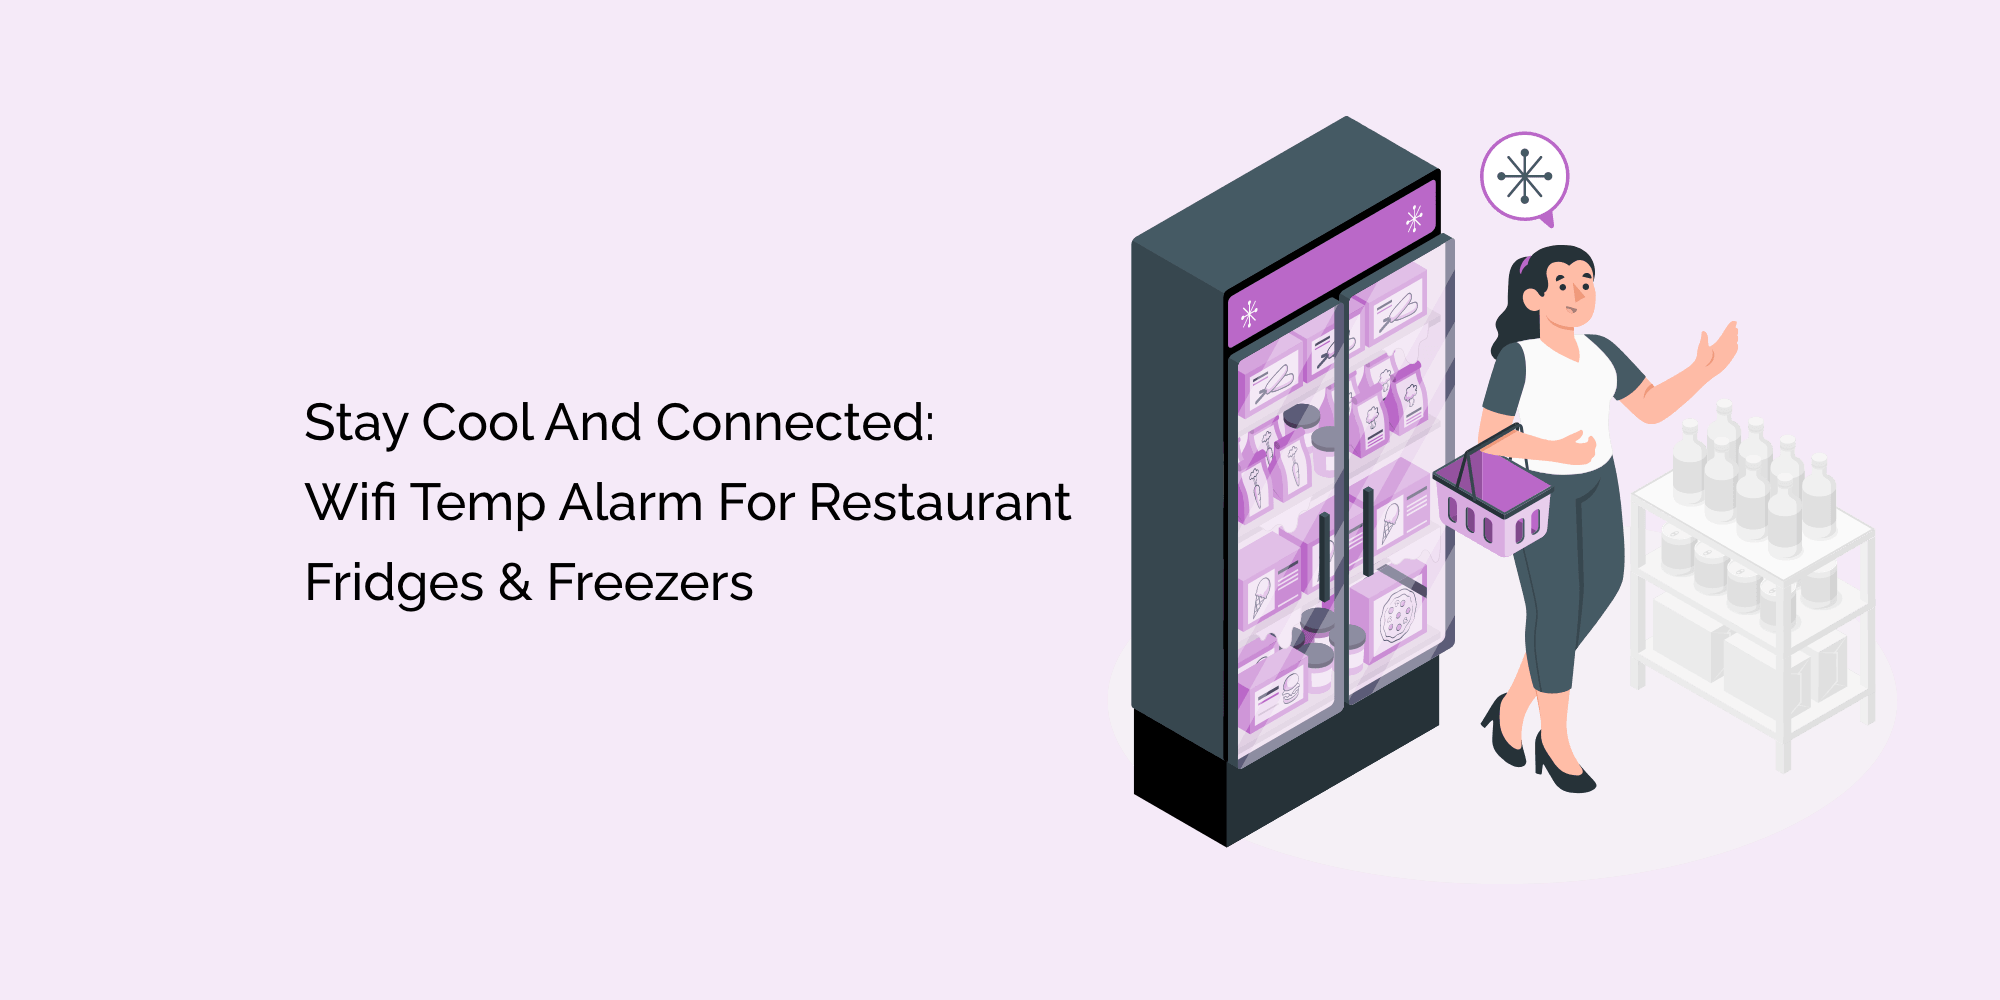 Stay Cool and Connected: Wifi Temp Alarm for Restaurant Fridges and Freezers